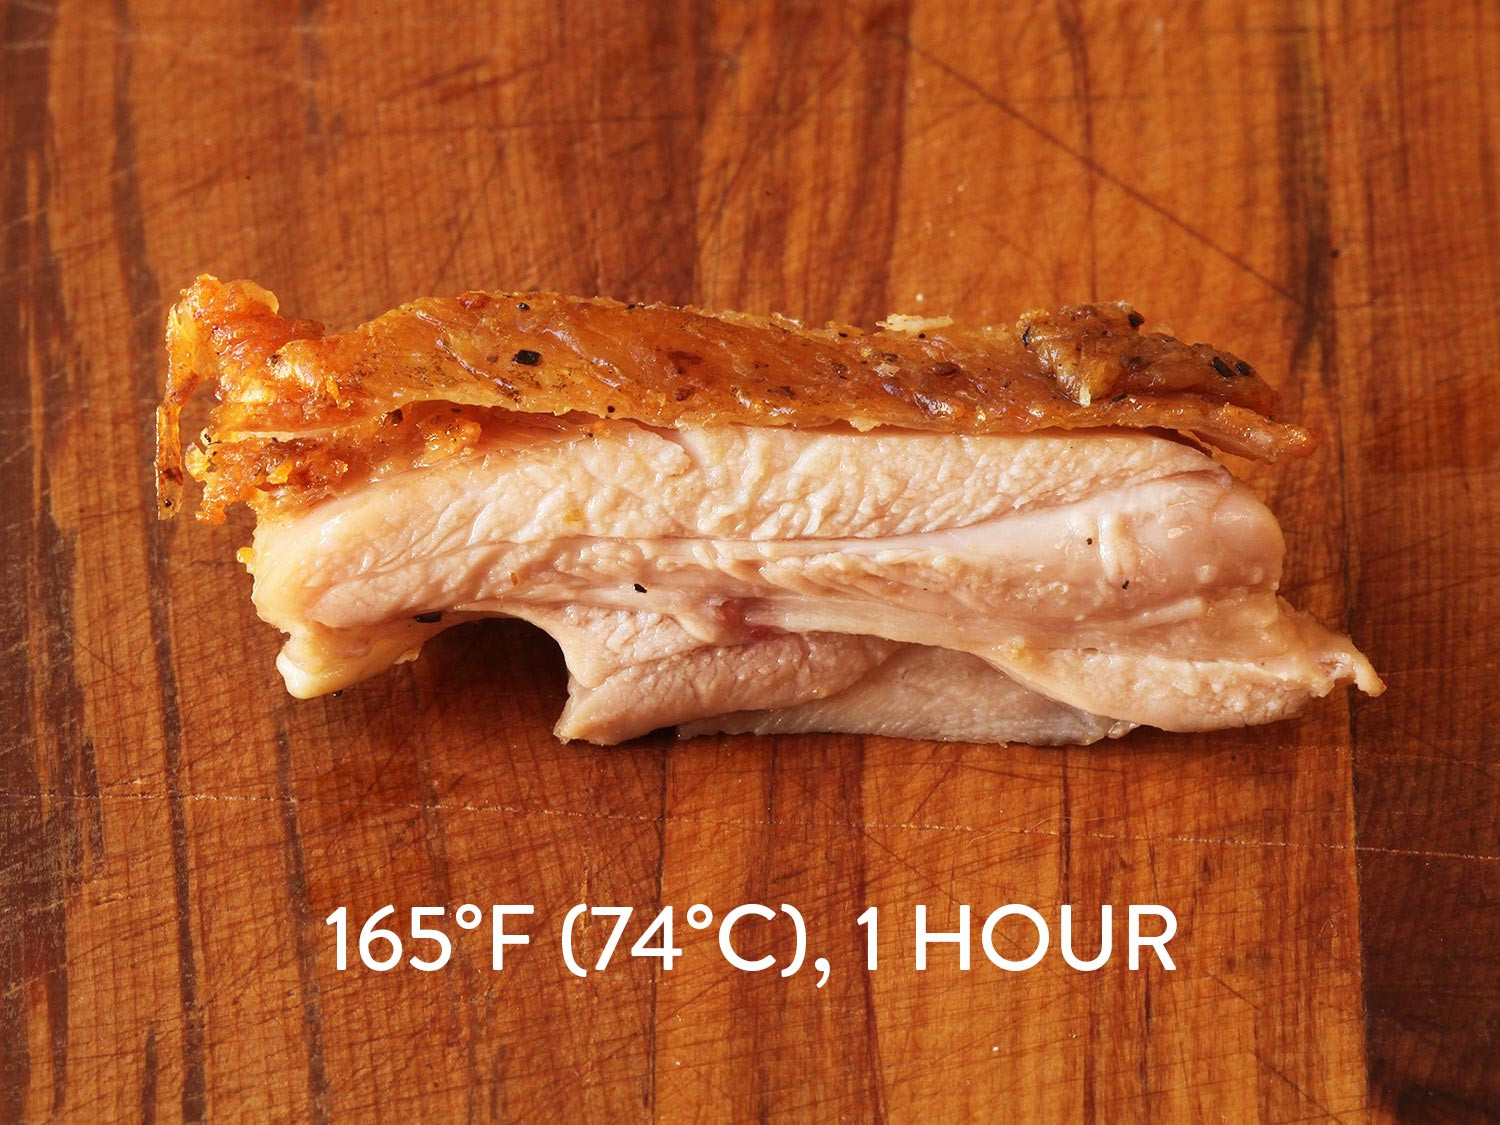 Sous Vide Chicken Thighs Temp
 How To Make Sous Vide Chicken Thighs With Crispy Skin